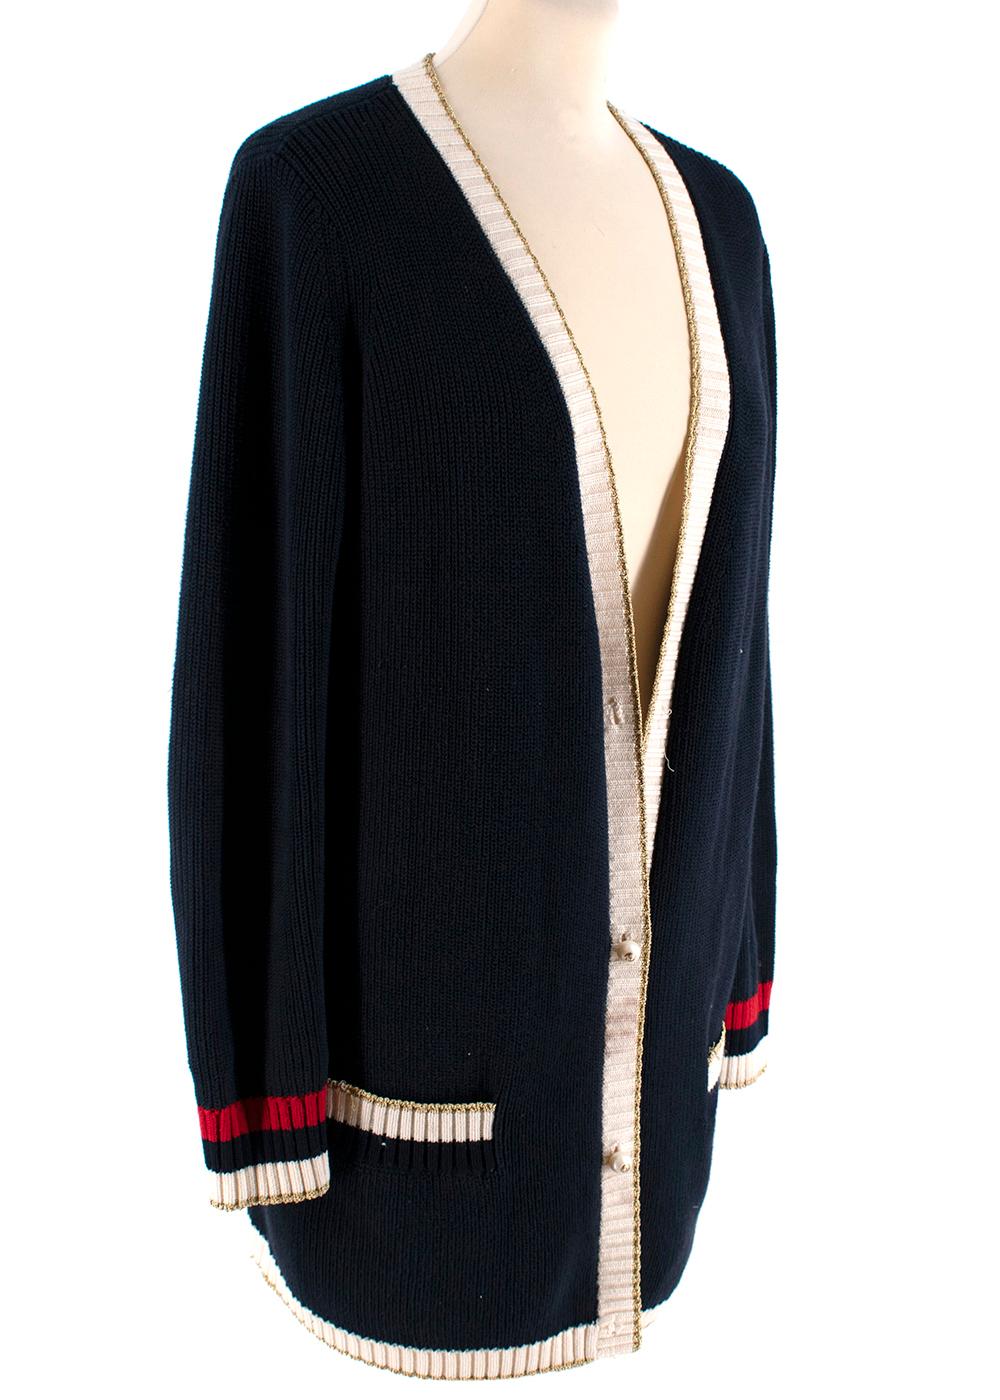 Gucci Blue Cotton Contrasting Trims Knit Cardigan

- Made of soft cotton knit
- Classic cut 
- Faux pearl button fastening to the front 
- GG logo to the buttons
- 2 pockets to the front 
- Embroidery detail to the back 
- V-neck 
- Contrasting